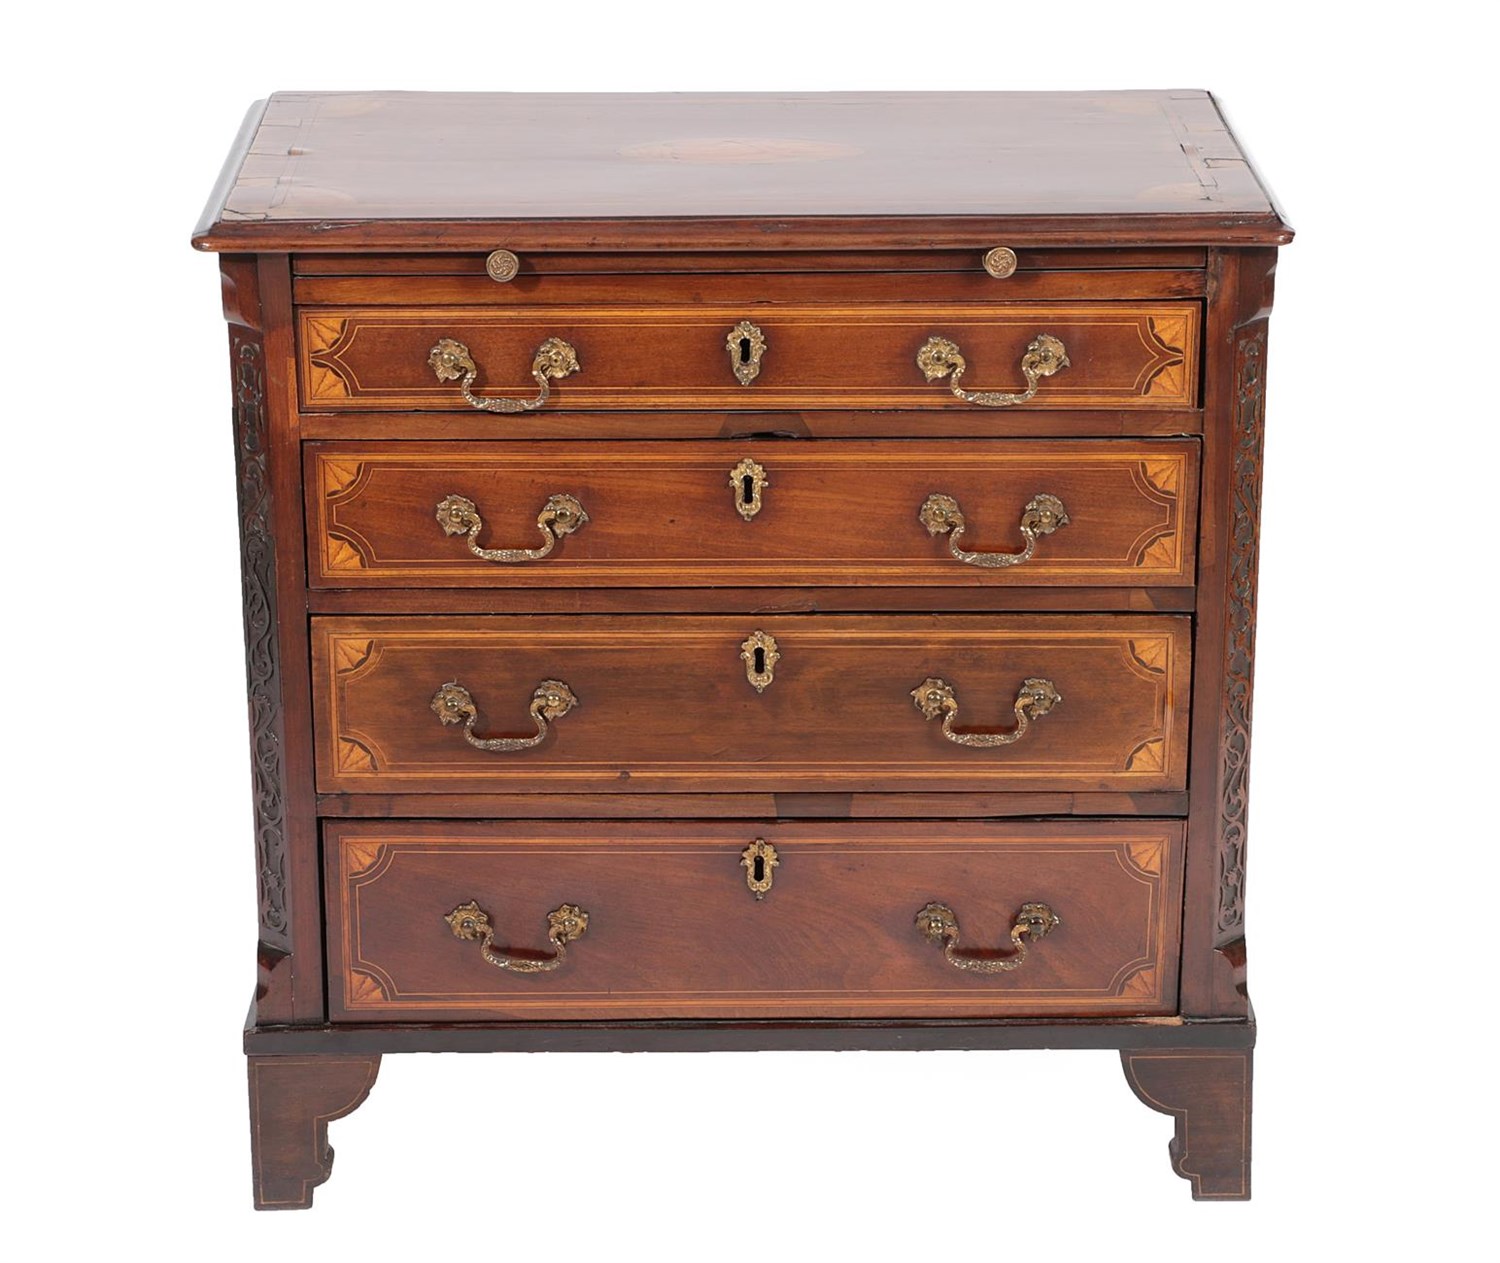 Lot 517 - A George III Mahogany and Satinwood Banded Straight Front Chest of Drawers, late 18th century,...